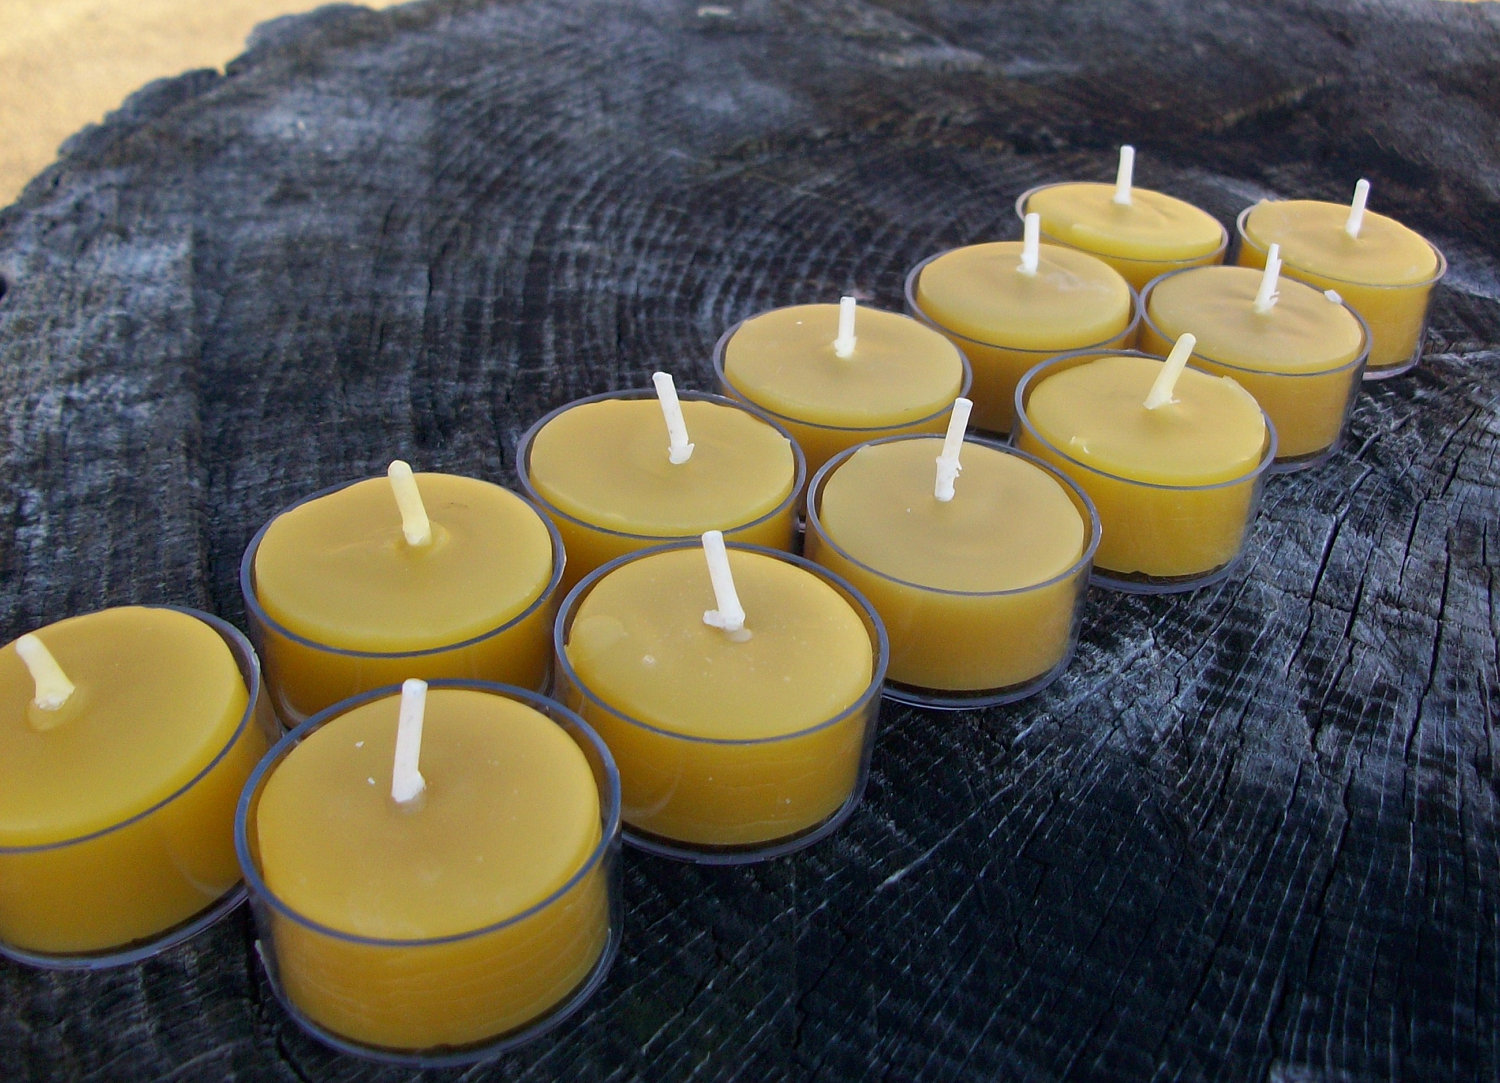 Each 100% beeswax Pure Beeswax Votive Candles